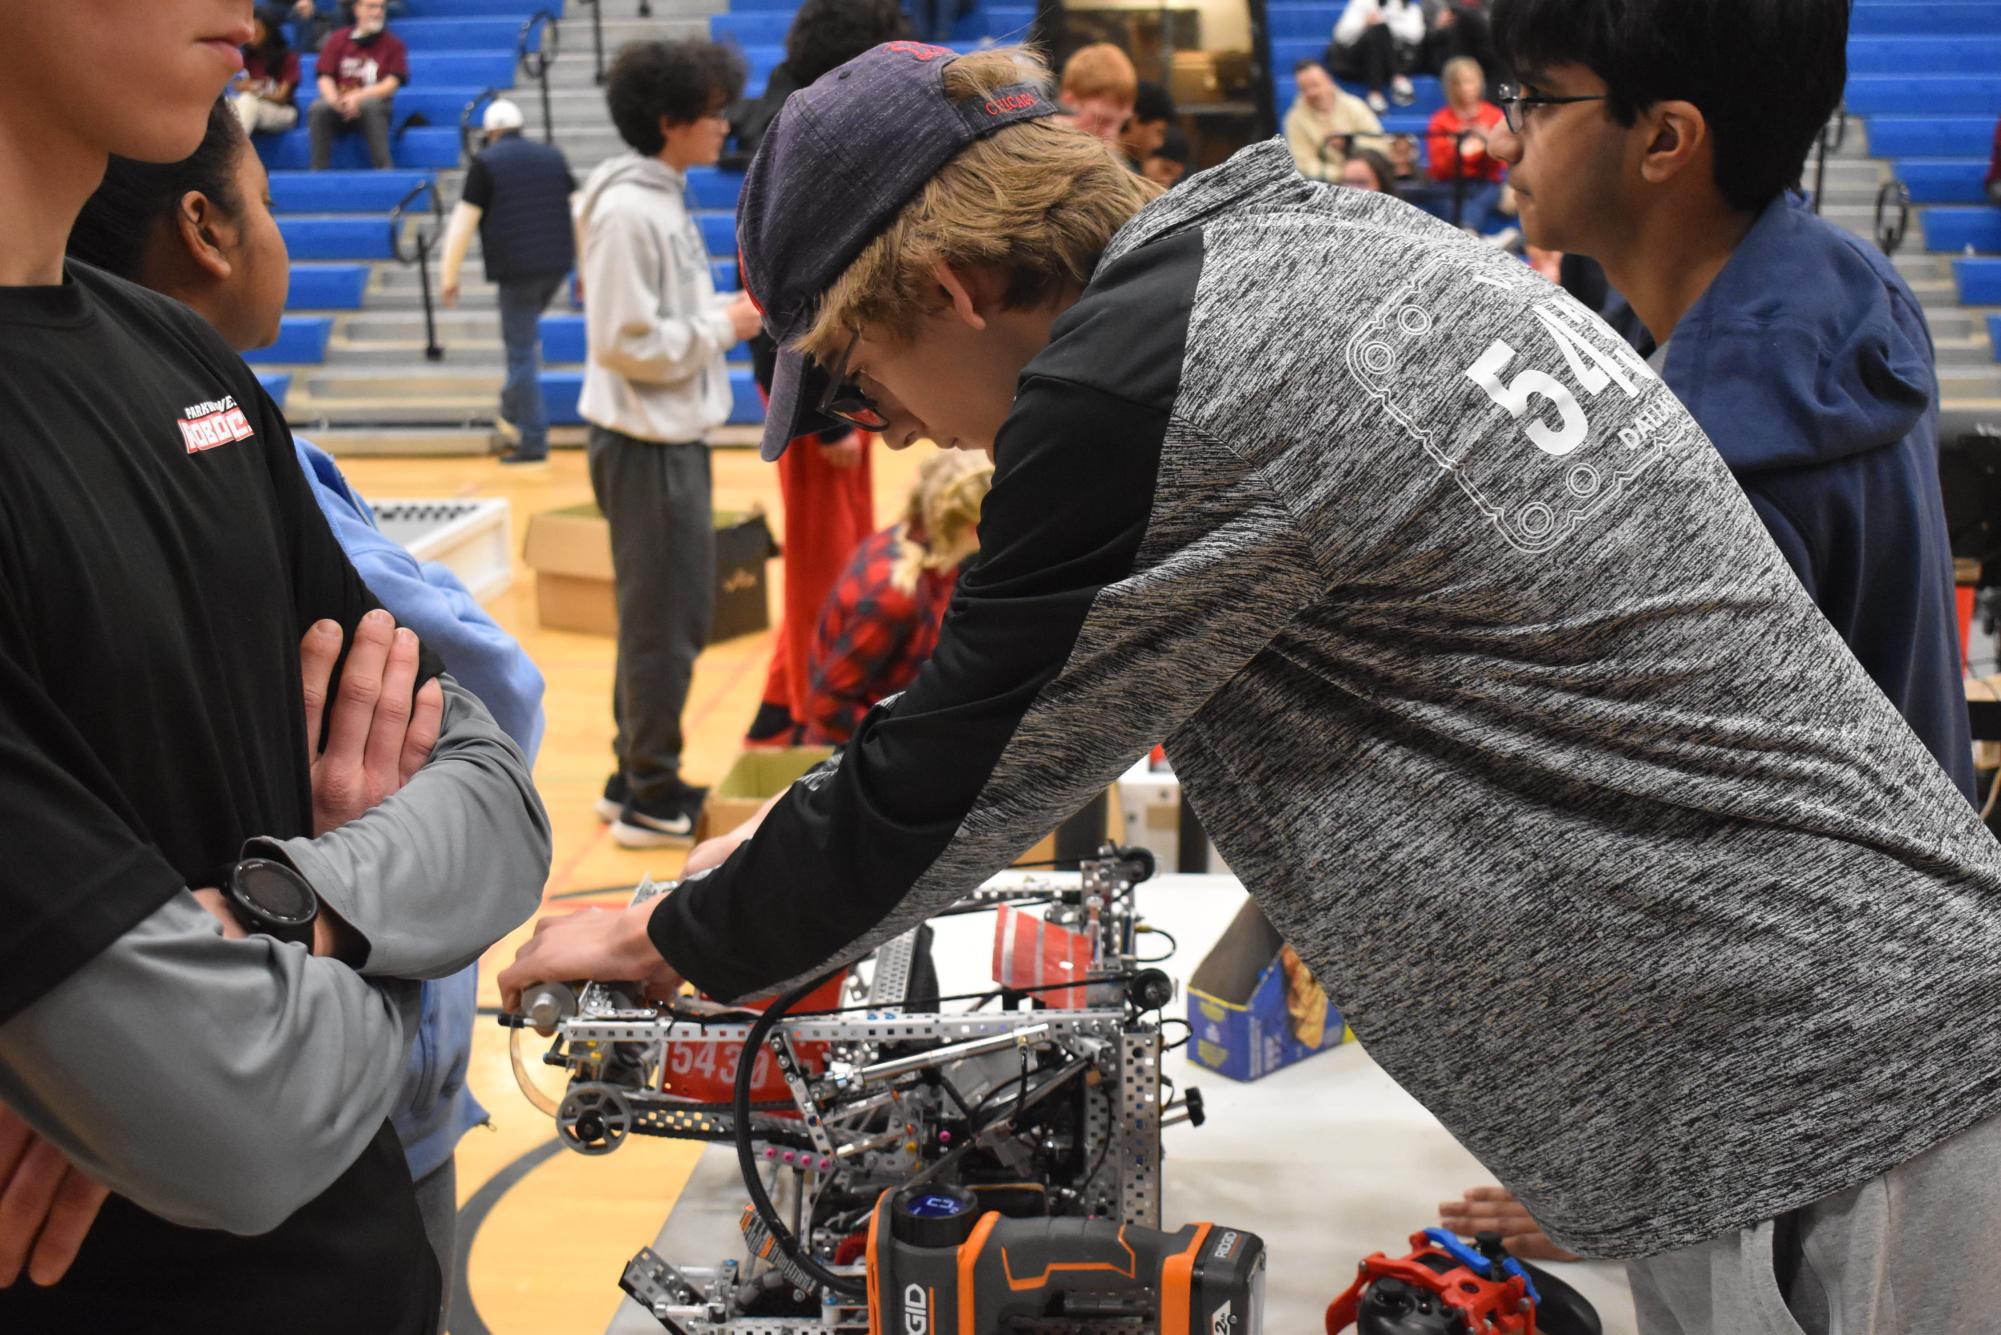 Peering through his glasses, Blue Brains Team Lead and senior Sawyer Ladd carefully examines his team’s robot in between contests. As team lead, Ladd seeks to encourage collaboration among his teammates. “We try [to] become more than just a group of people achieving successful robotics. On my team, Ive tried to make us more of a friend group than a robotics team. So thats improved our team chemistry — we just generally enjoy being around each other and that allows us to work together a little [better],” Ladd said.